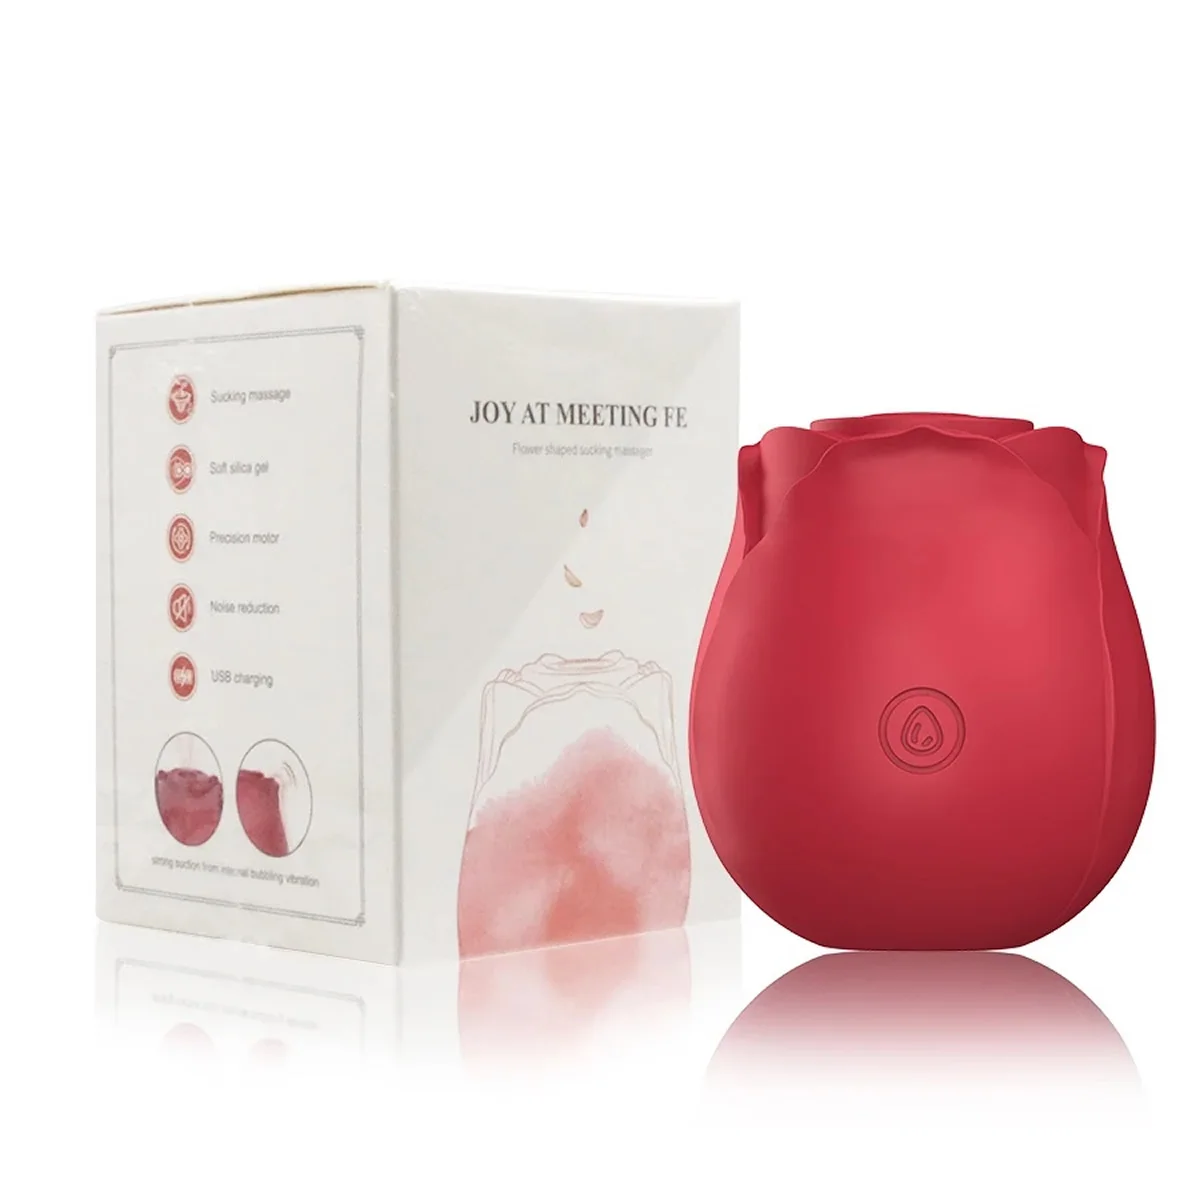 Rose Shape Vagina Sucking Vibrator Intimate Good Nipple Sucker Oral Licking Clitoris Stimulation Powerful Sex Toys for Women Trending Now cb5feb1b7314637725a2e7: 10 PCS RED VALUE SET|PINK IN SEALTED BOX|RED IN SEALTED BOX